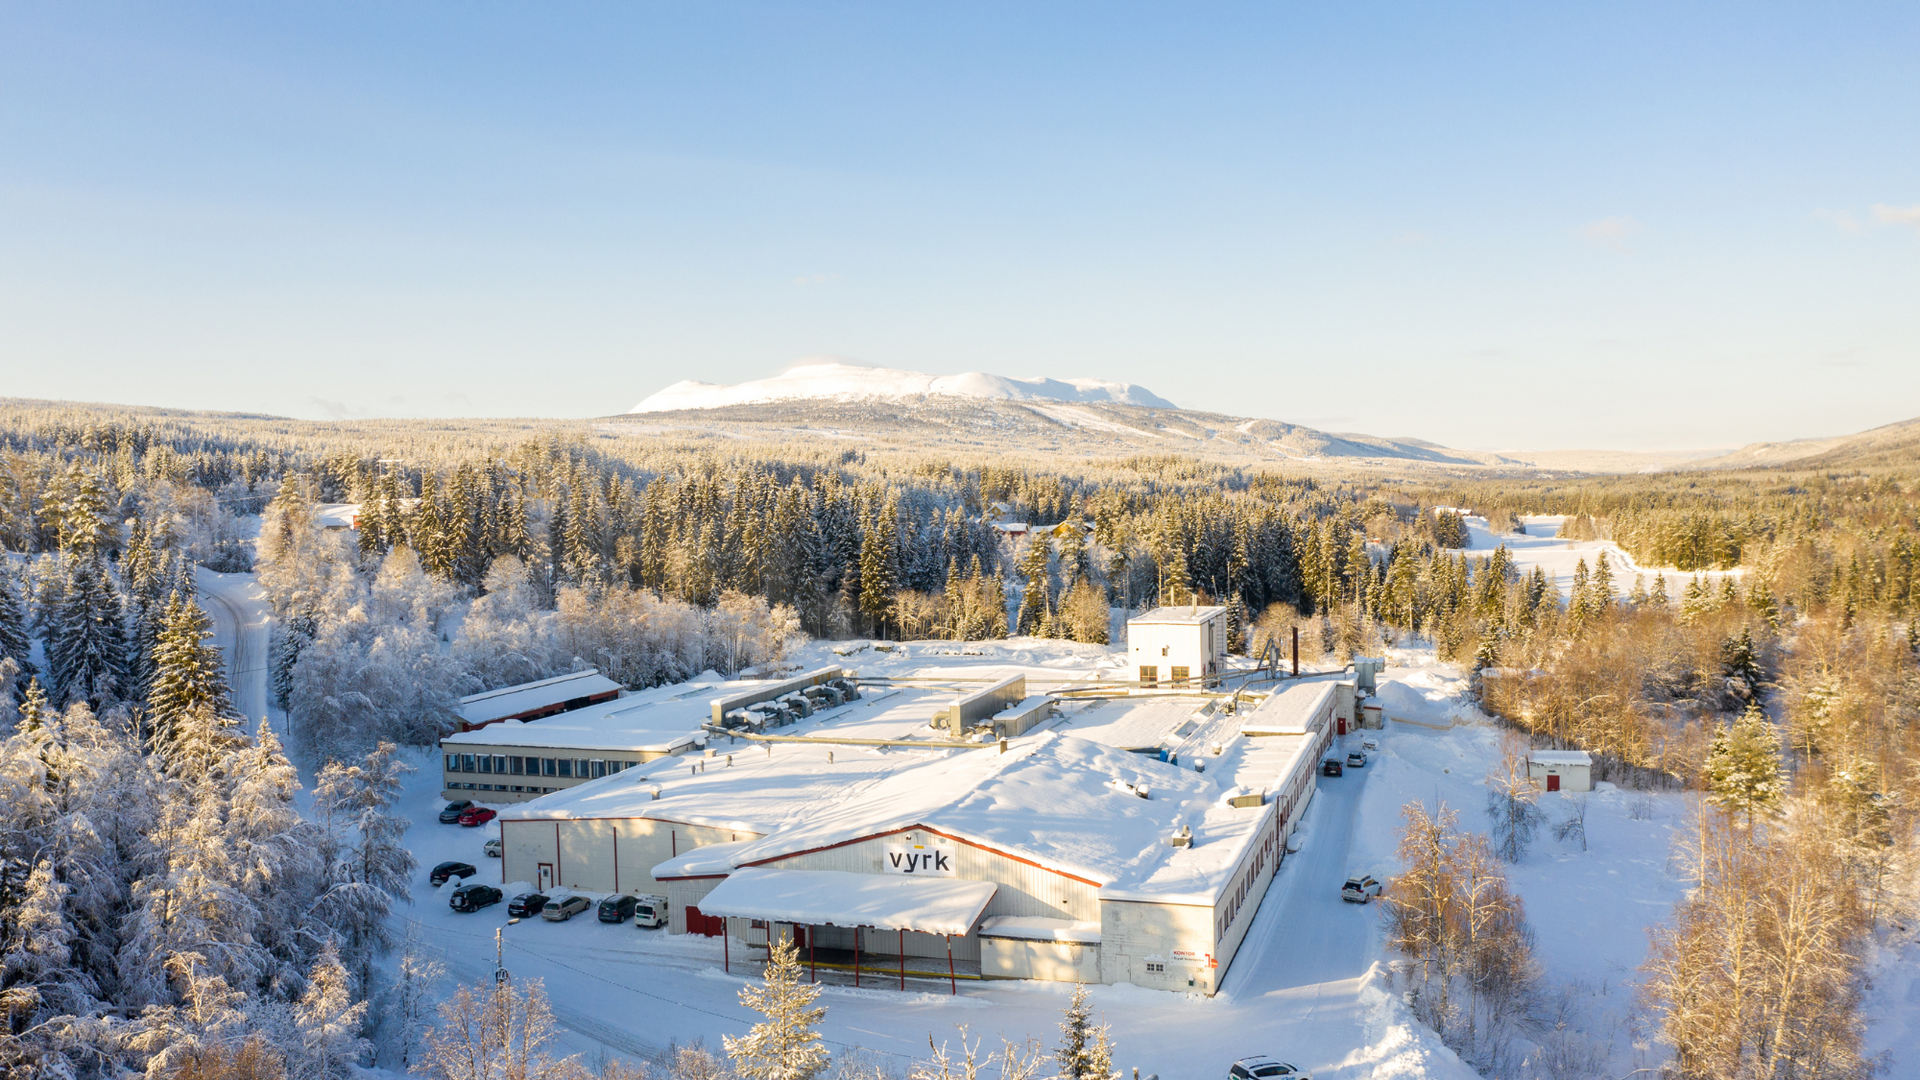 Vyrk-factory surrounded by Norwegian nature and Trysil-mountains